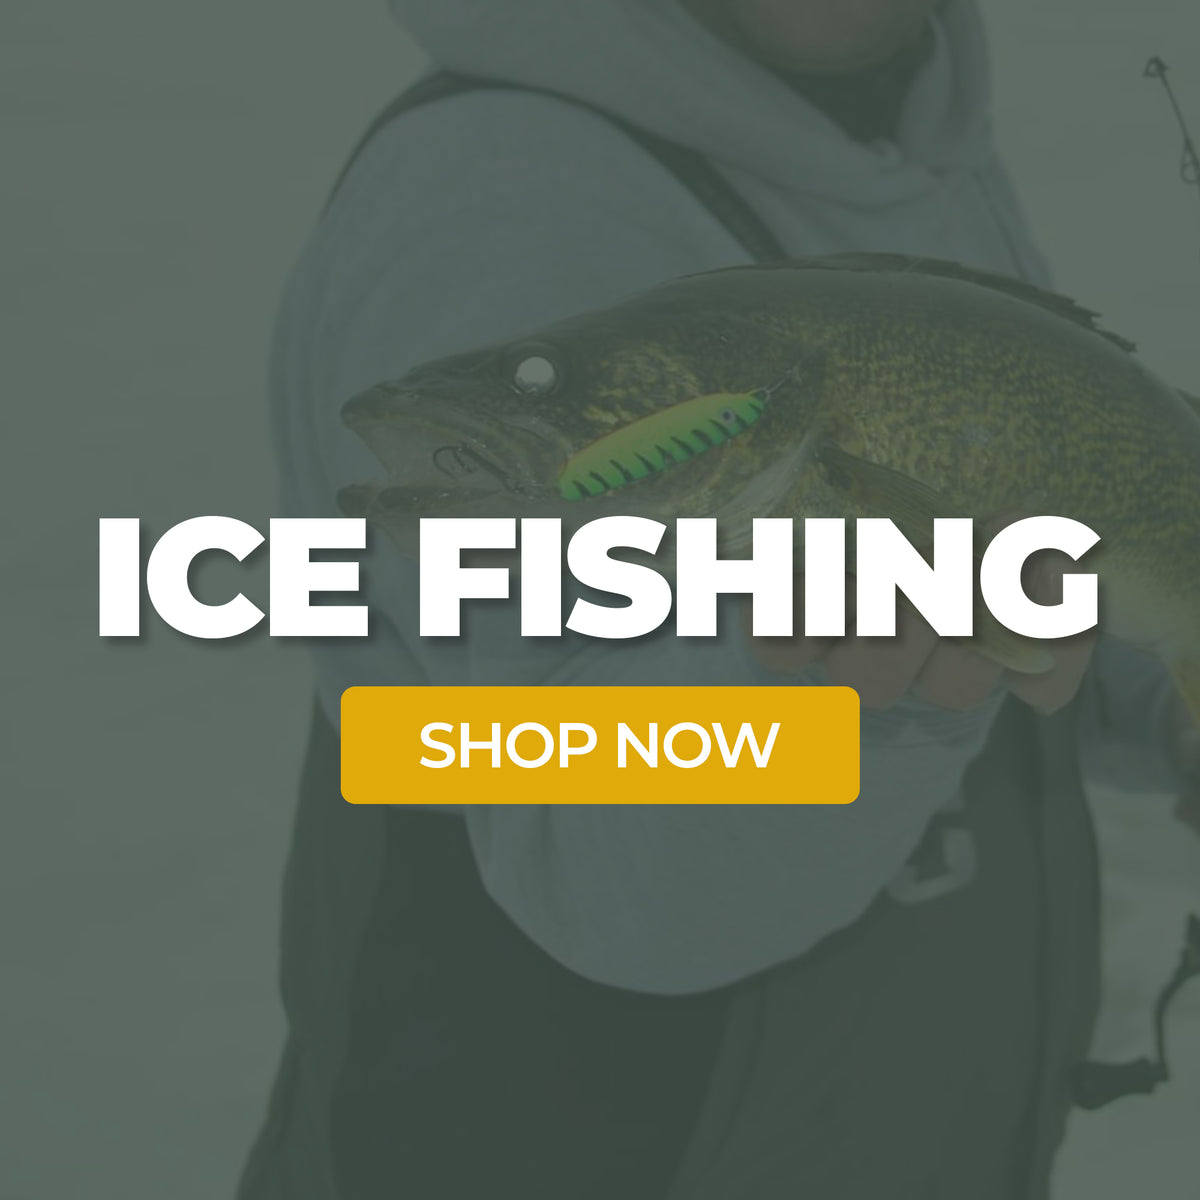 𝙎𝙈𝙄𝙇𝙀 𝘽𝙇𝘼𝘿𝙀 𝙎𝘿 𝘿𝙍𝙄𝙁𝙏 𝙅𝙄𝙂 — engineered to catch more  walleye. Available now